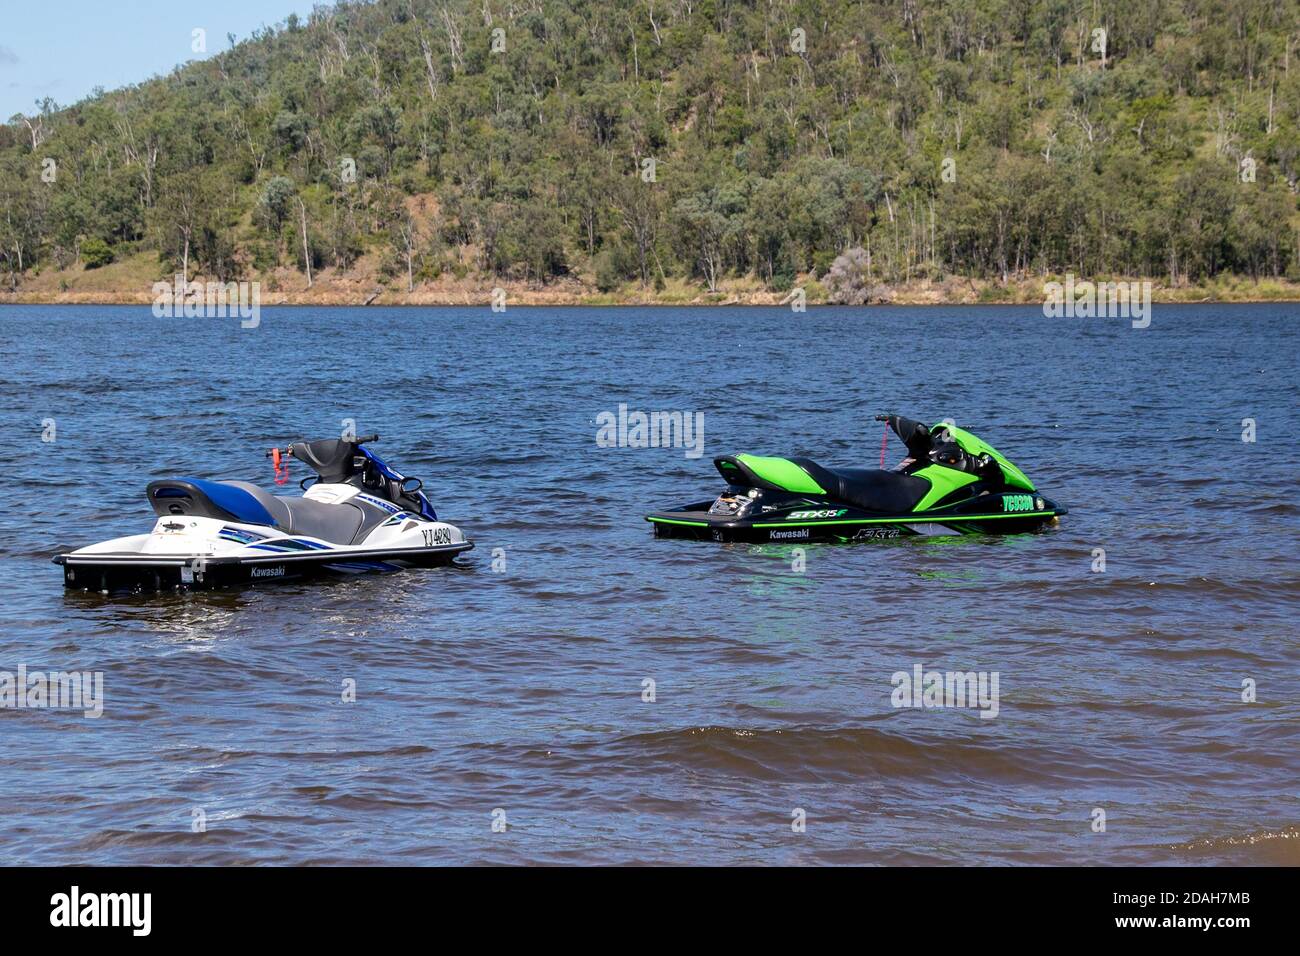 Two jet skis parked up on a lake with no riders Stock Photo